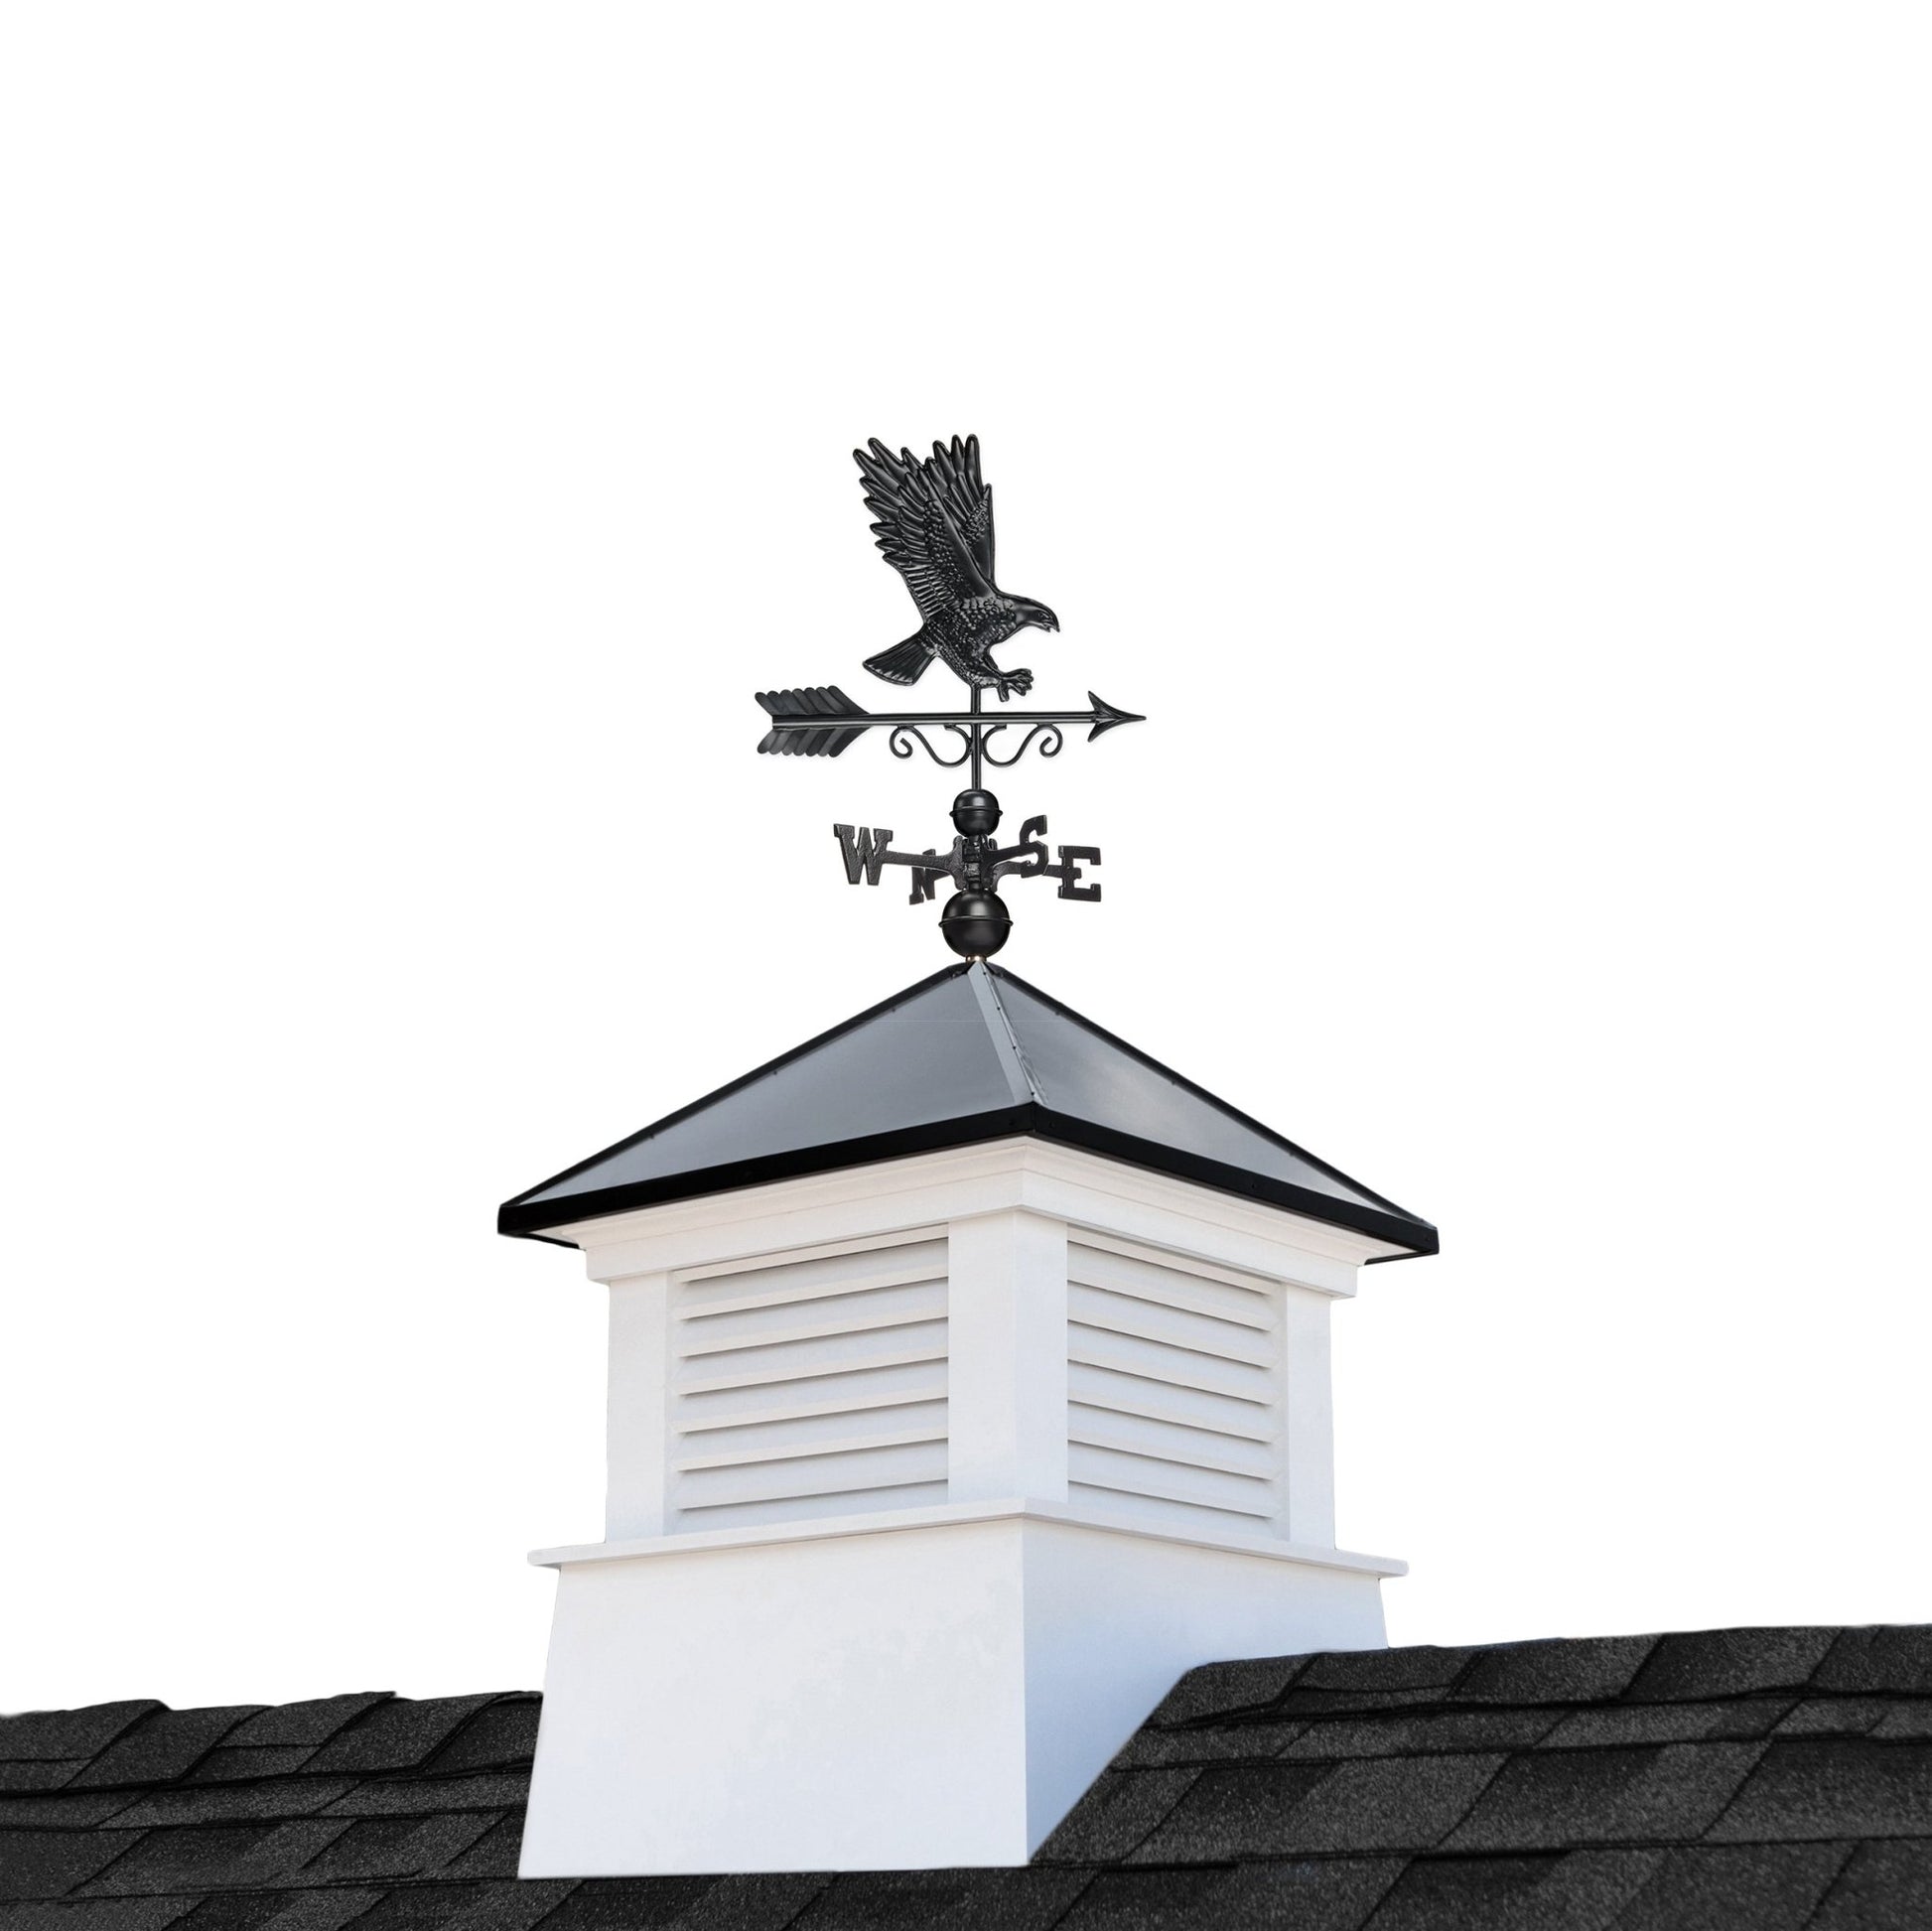 30" Square Manchester Vinyl Cupola with Black Aluminum roof and Black Aluminum Eagle Weathervane - Good Directions